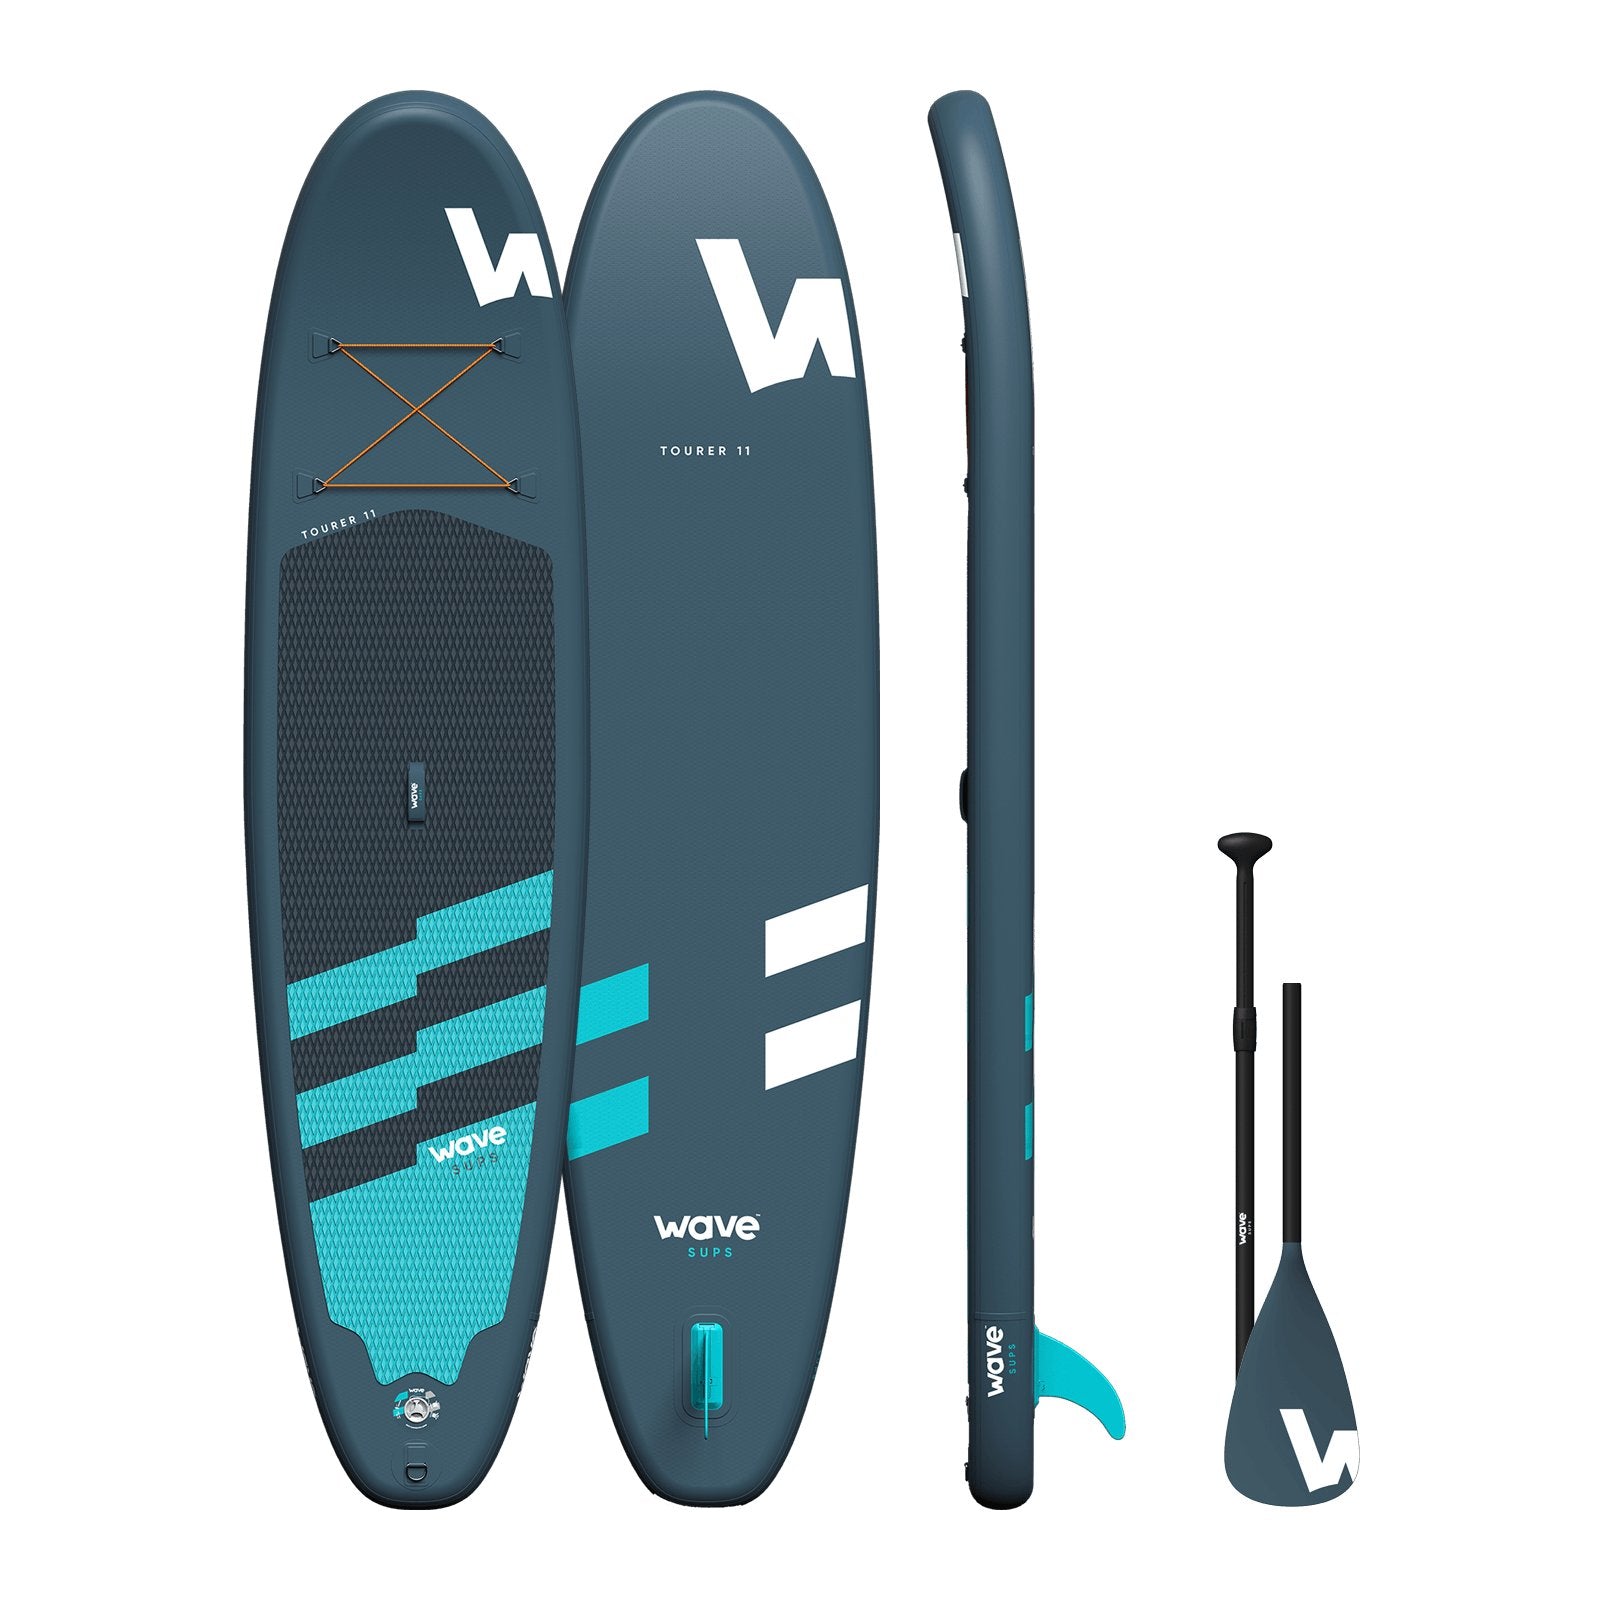 Tourer SUP | Inflatable Stand-Up Paddleboard | 10/11ft | Navy - Wave Sups EU